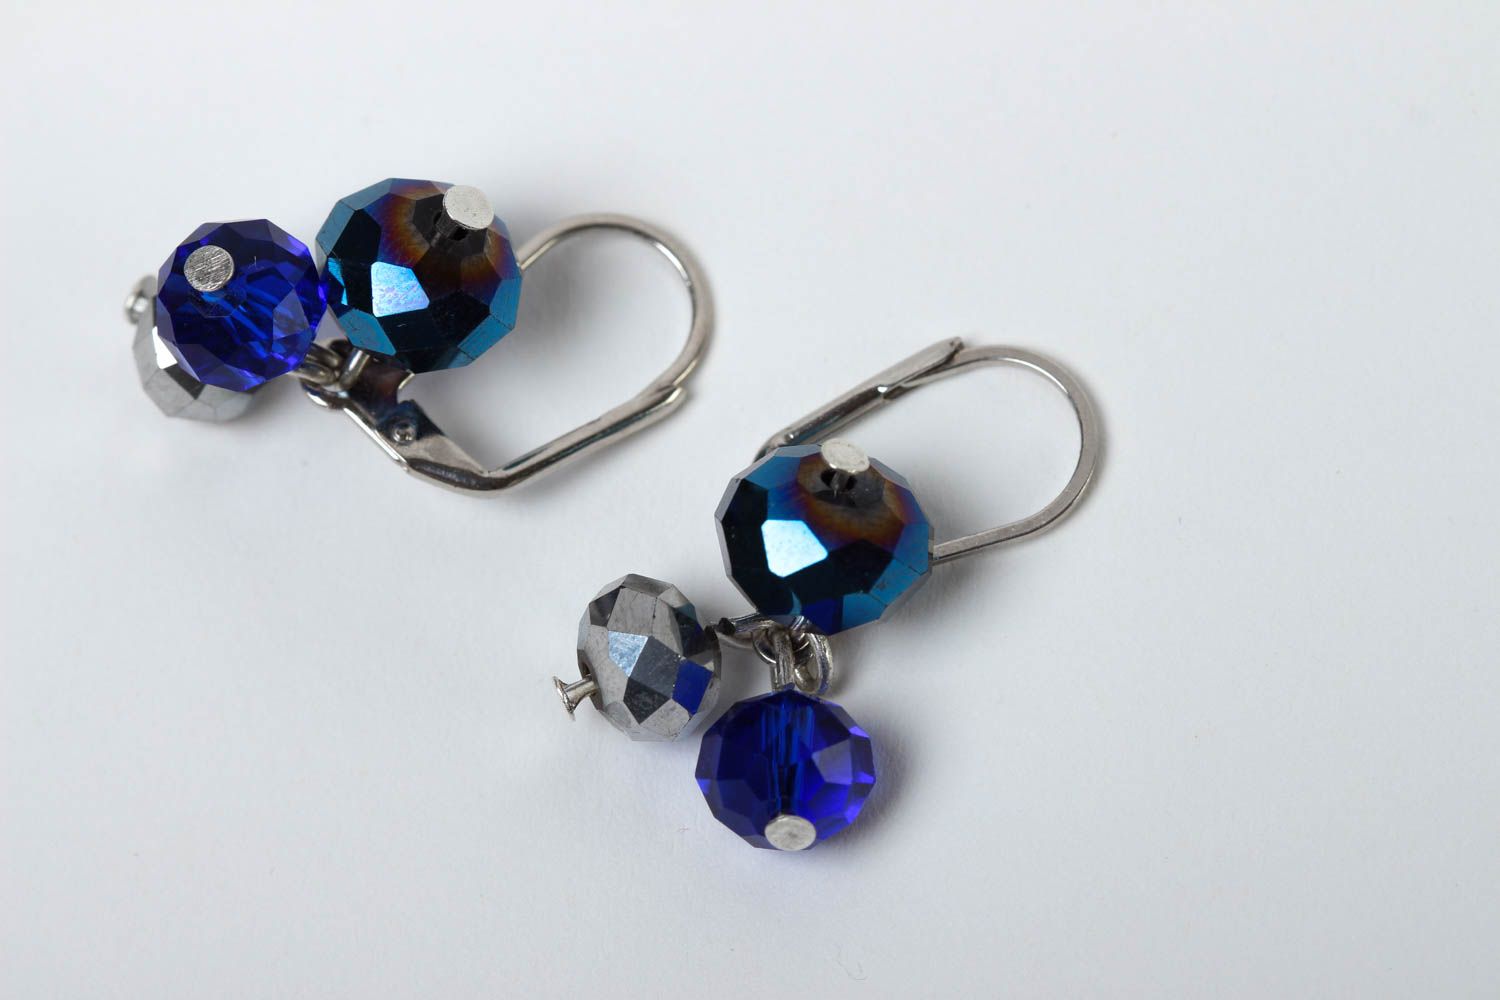 Handmade earrings with natural stones earrings with charms fashion accessories photo 2